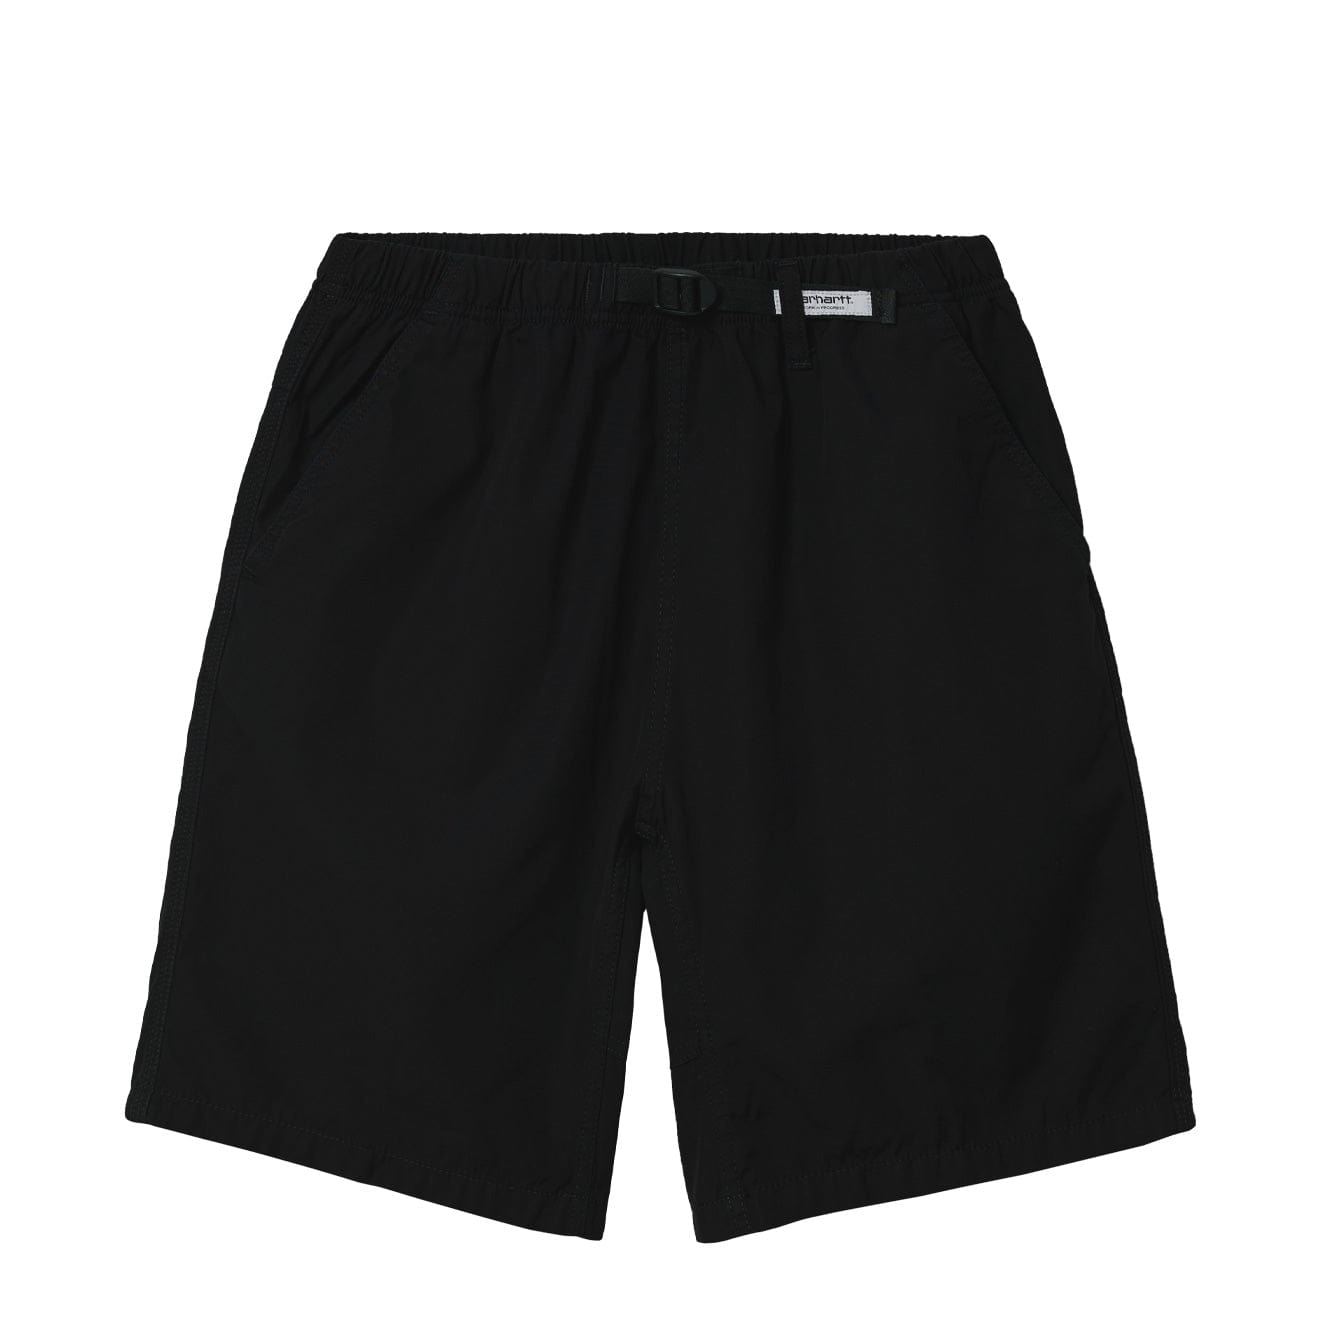 Carhartt WIP Clover Short Black Stone Washed | The Sporting Lodge